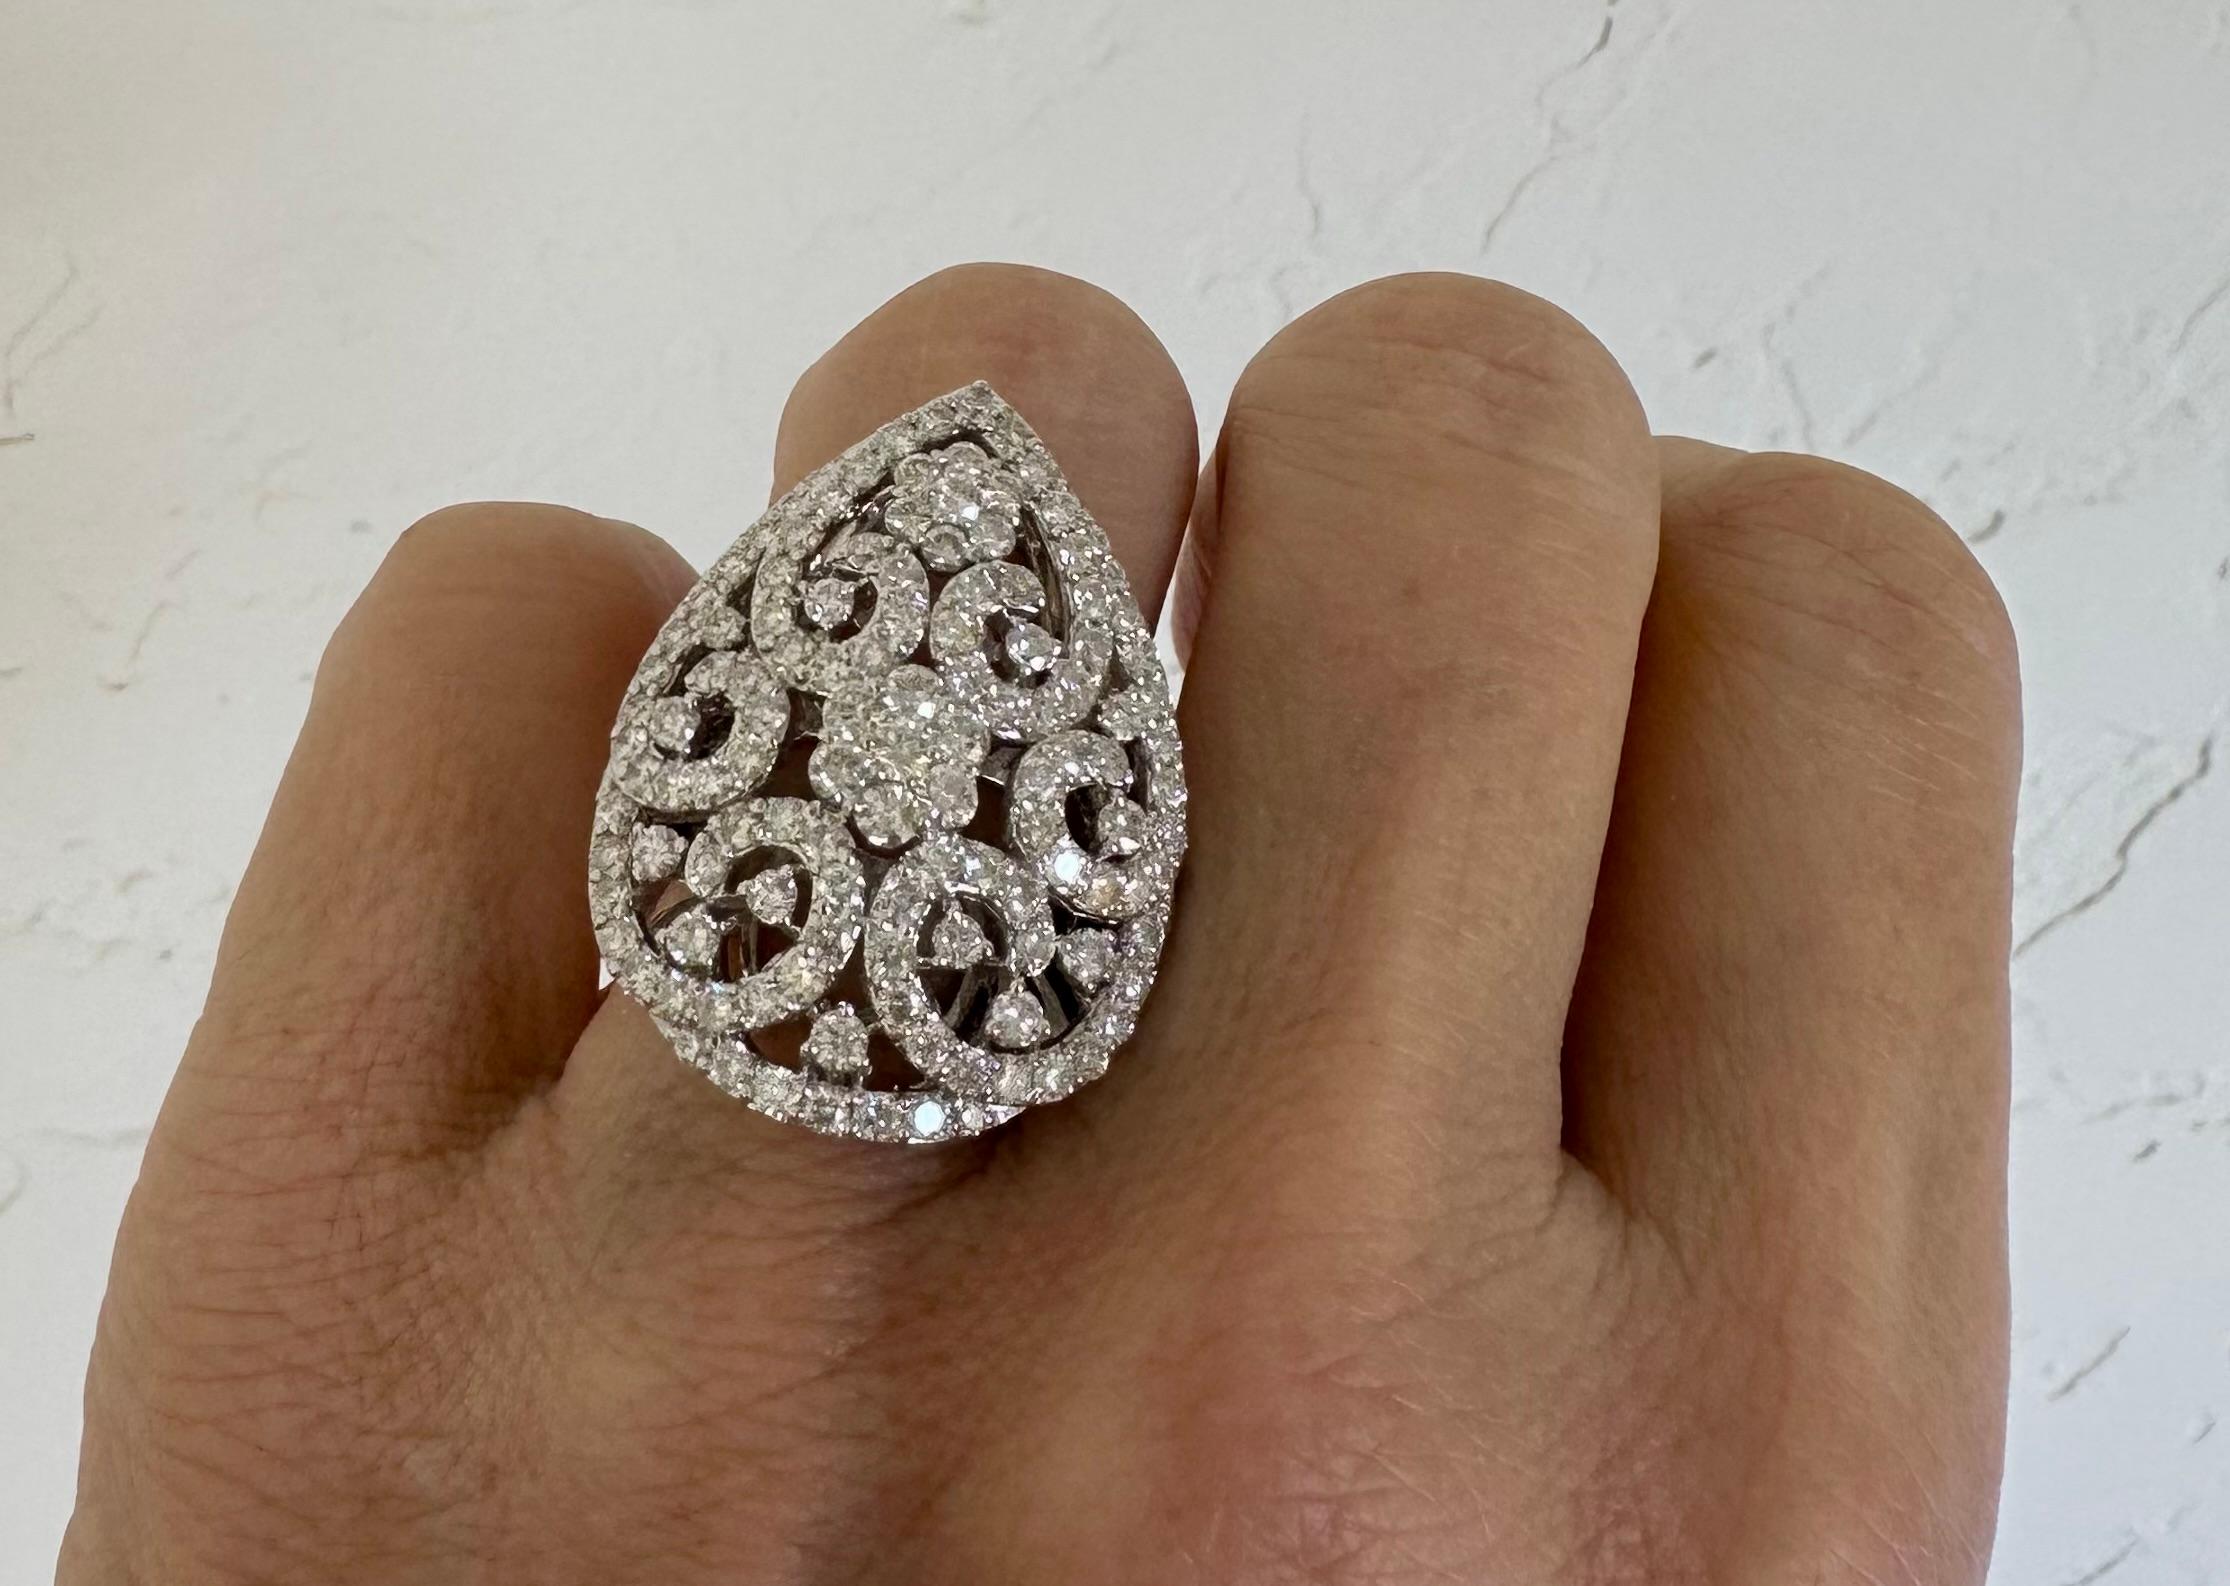  Elegant 7.00 Carat Diamond Pear Shaped Cluster Cocktail Ring in 18K White Gold In Excellent Condition For Sale In Tustin, CA